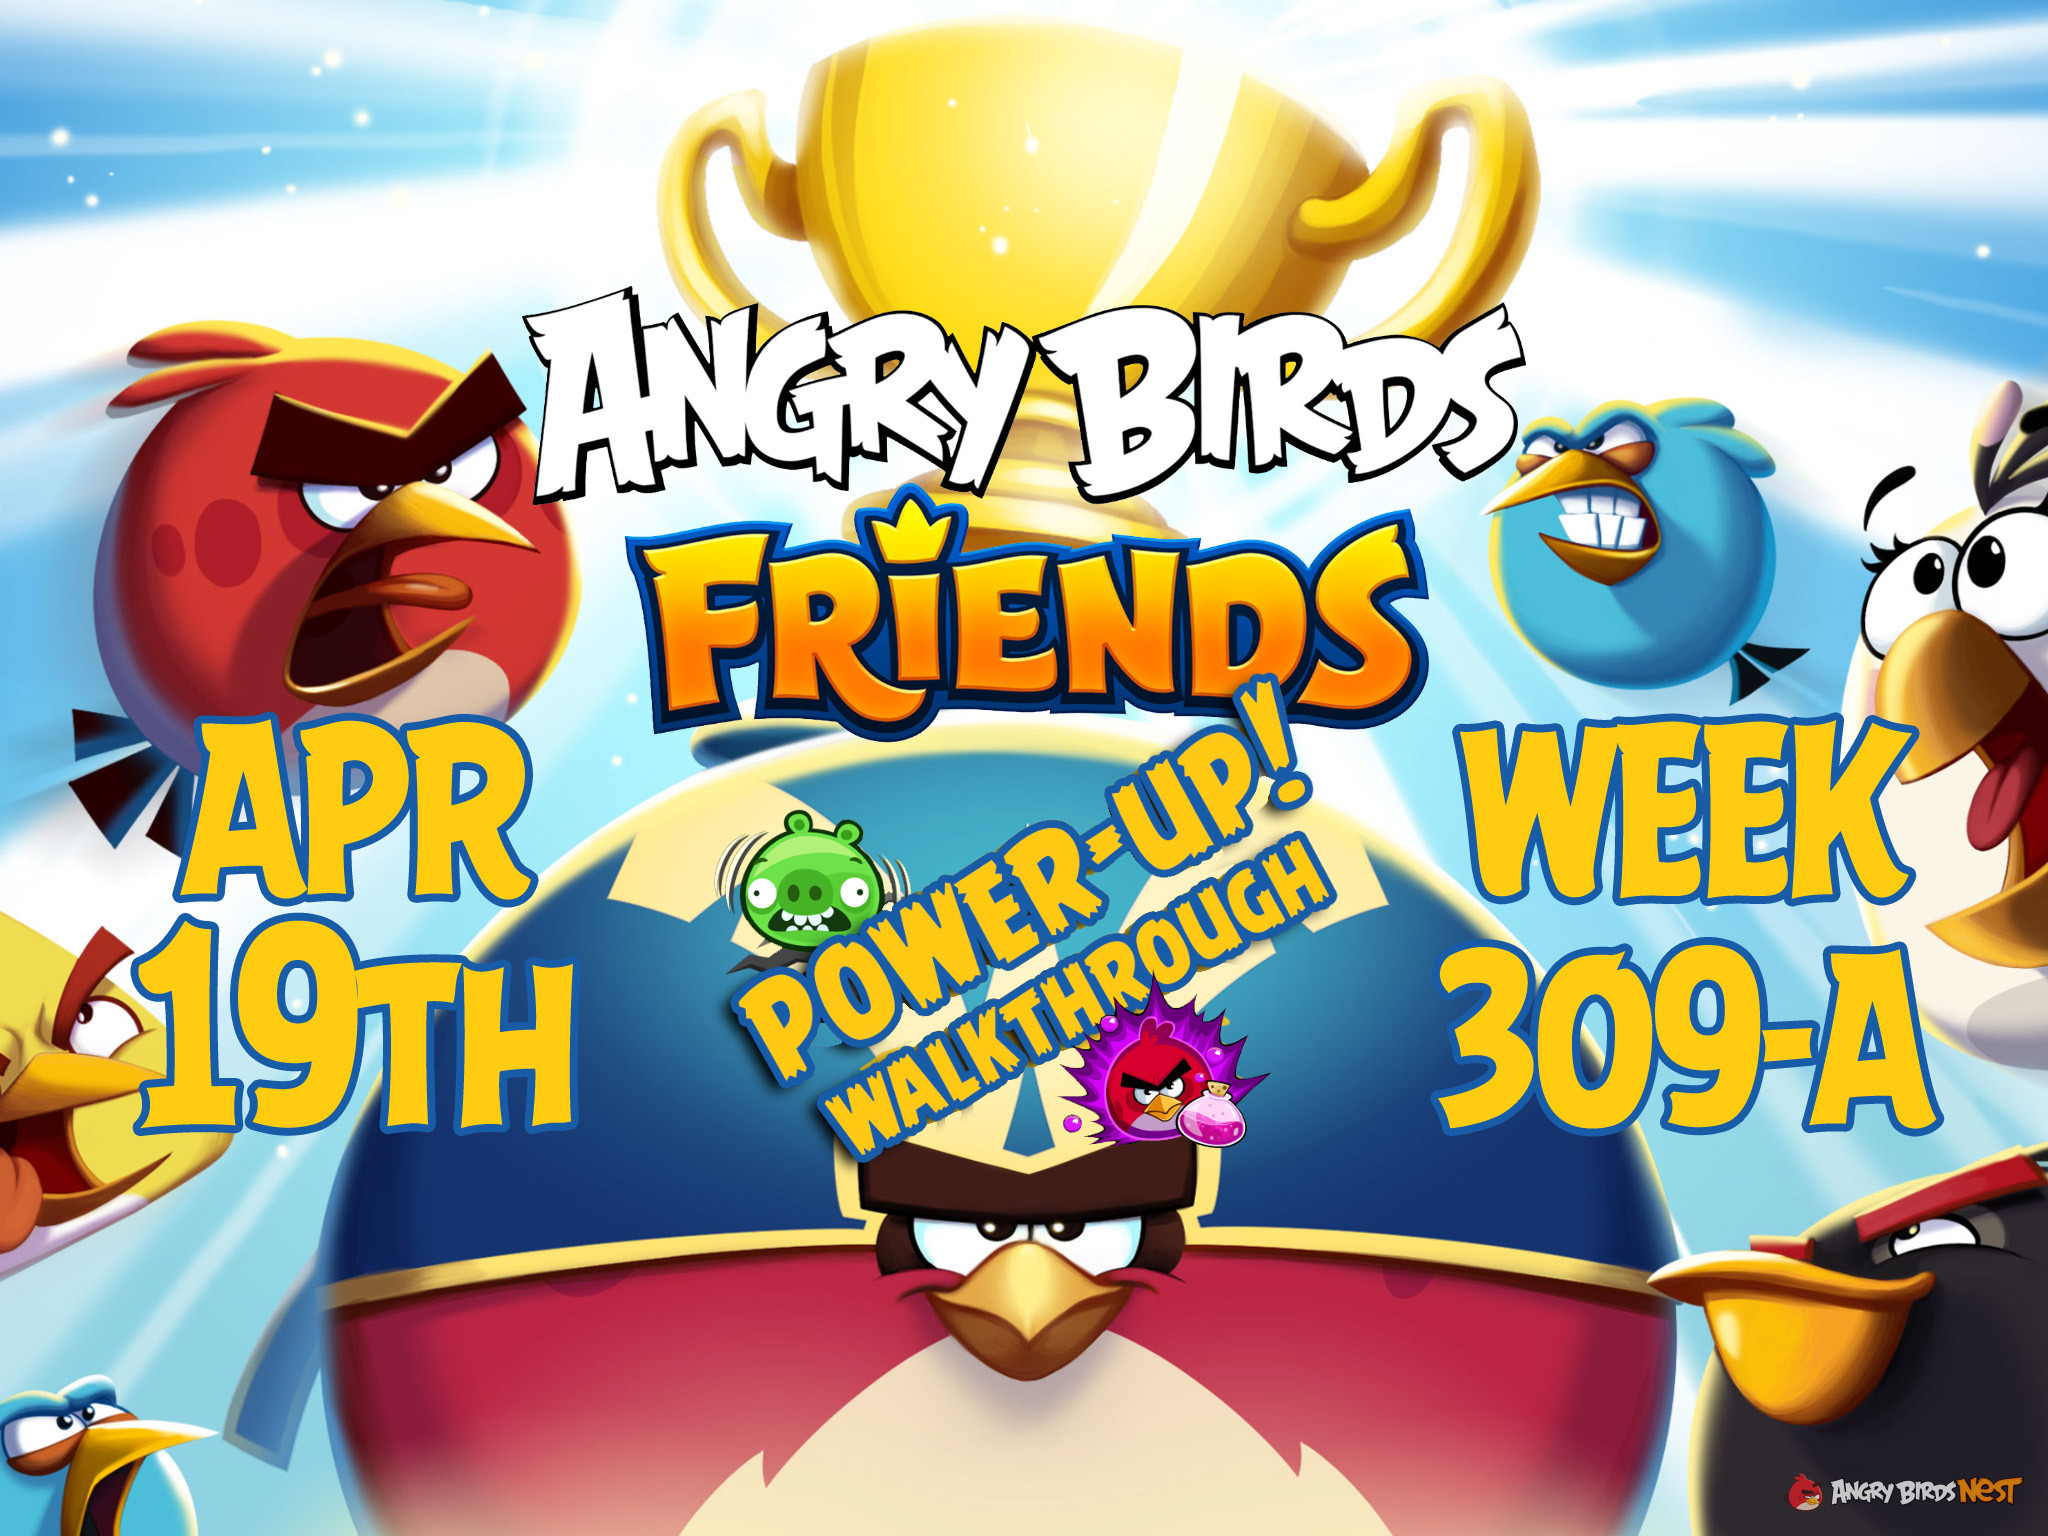 Angry Birds Friends Tournament Week 309-A Feature Image PU